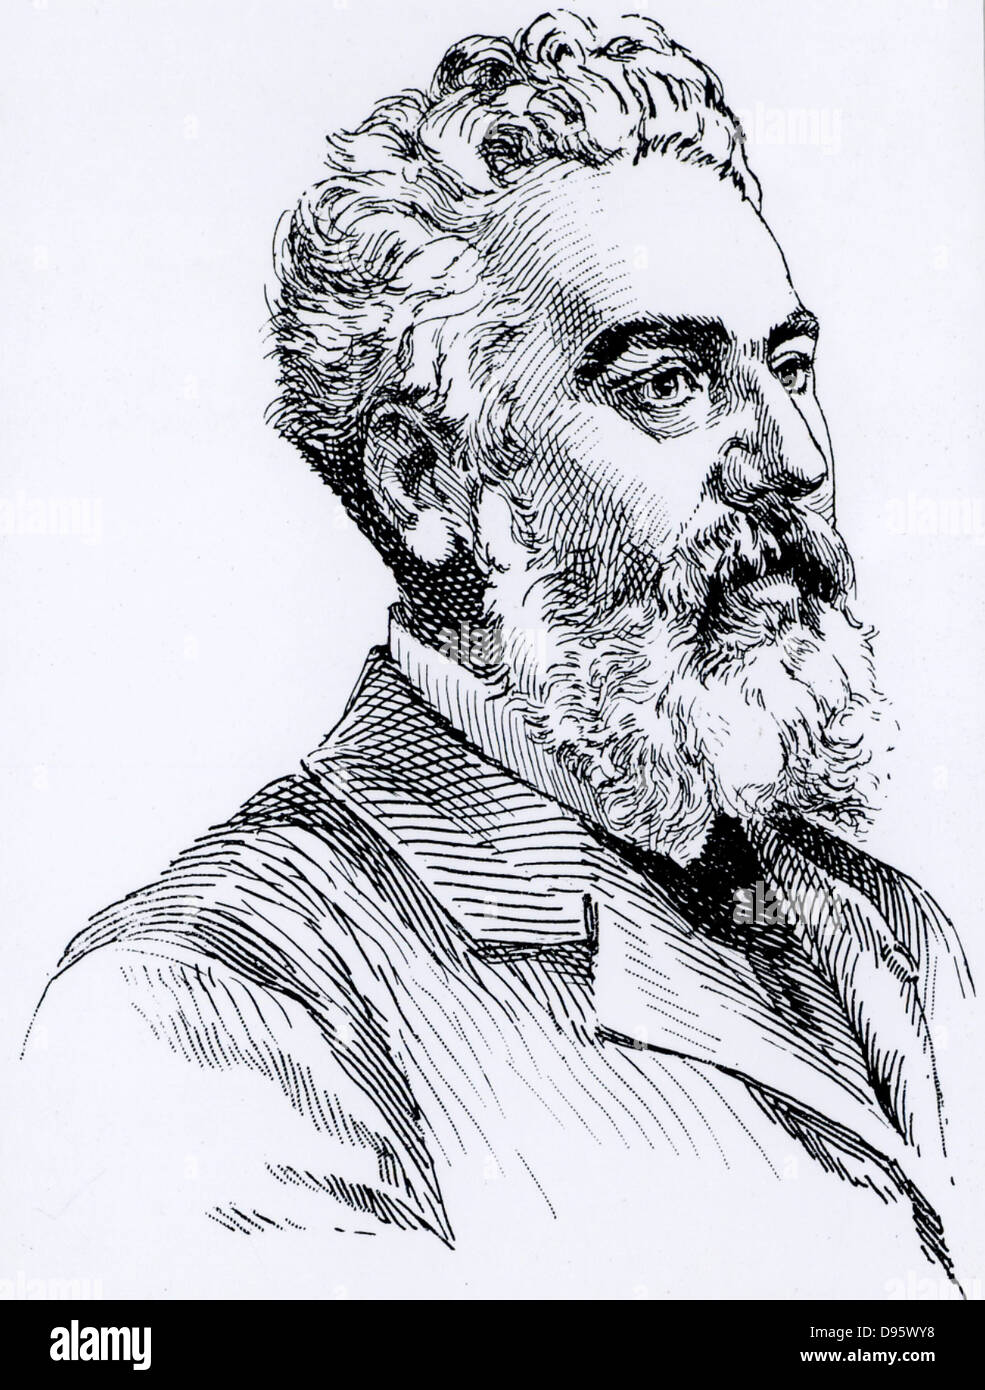 Alexander Graham Bell (1847-1922) Scottish-born American inventor. Patented his telephone in 1876.  Engraving from 'A Travers l'Electricite' by Georges Dary (Paris, c1906). Stock Photo